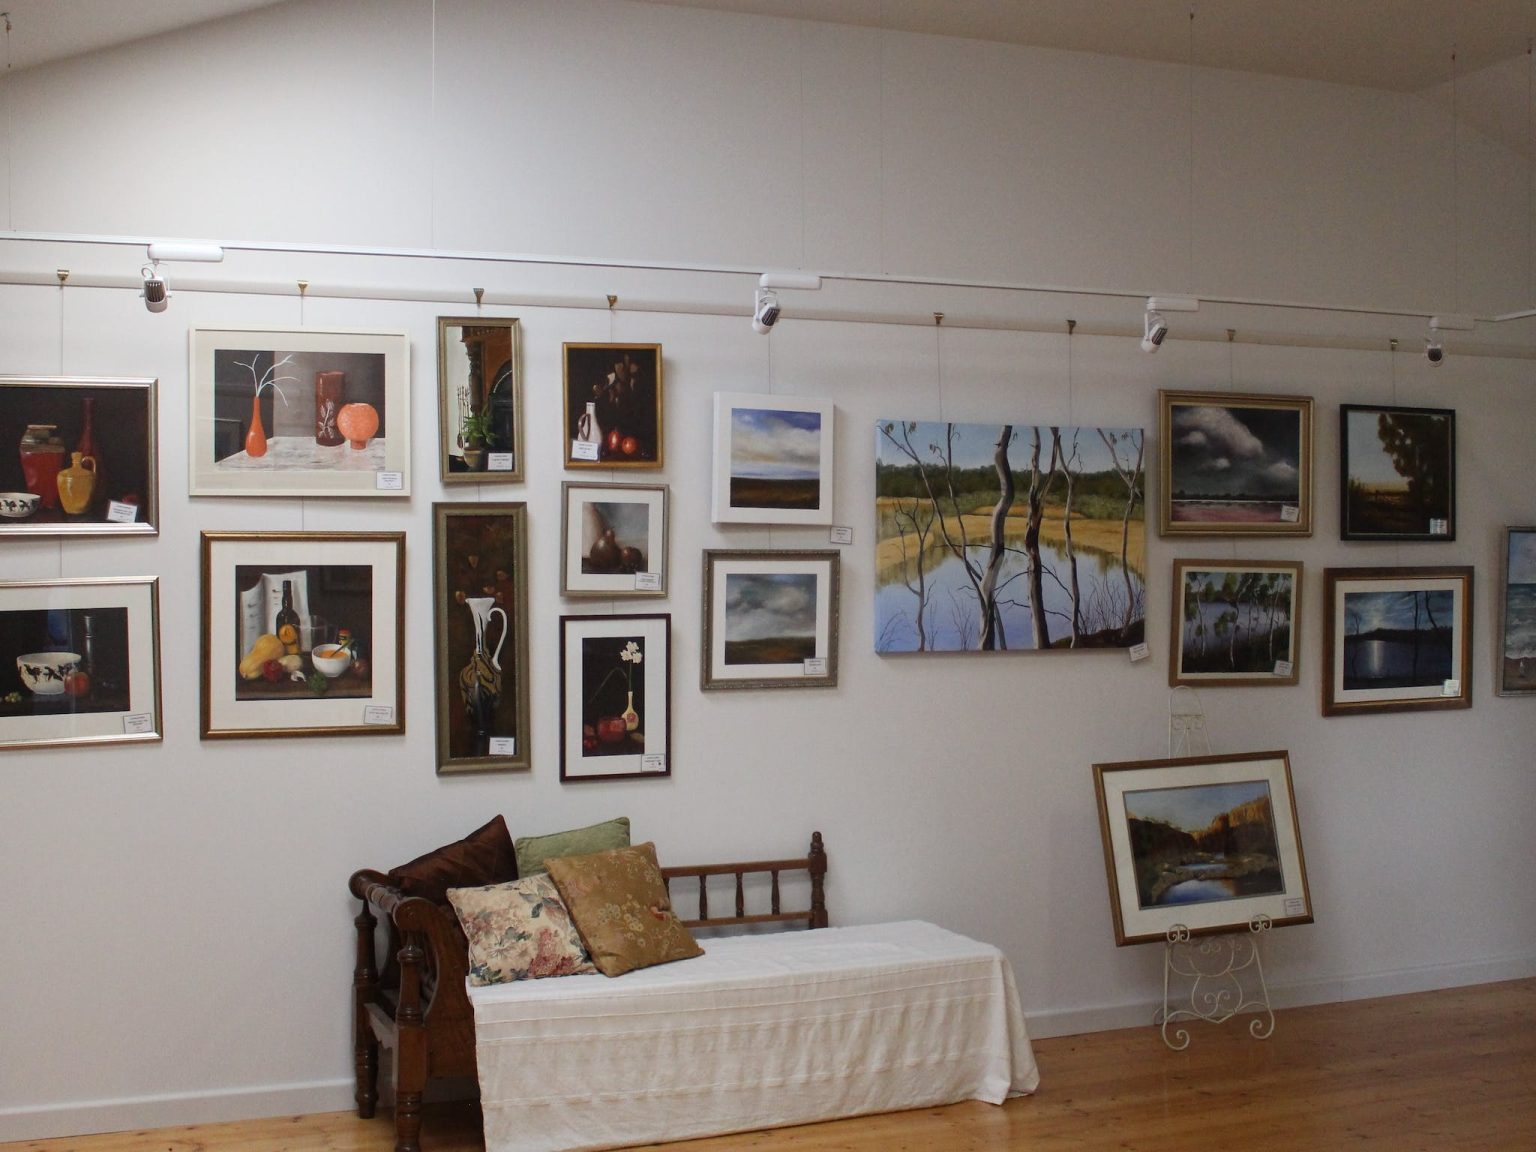 Paintings on the gallery wall including several still life and landscapes